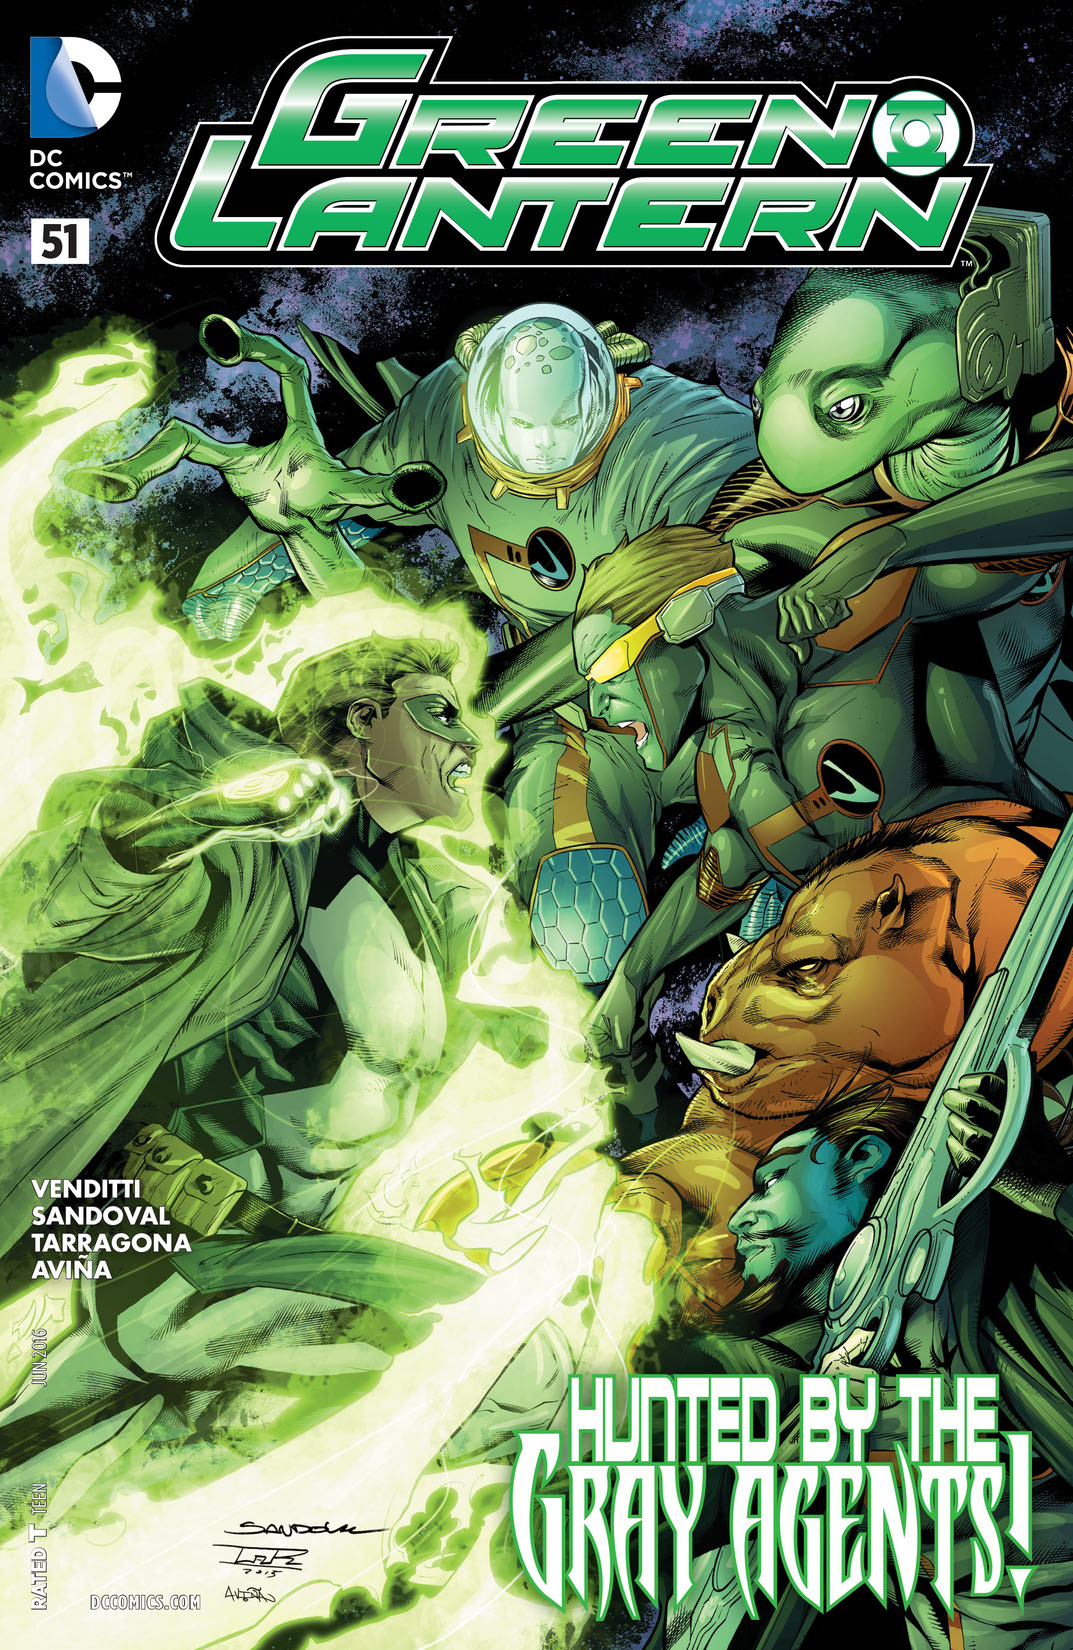 Green Lantern (2011-) #51 preview images